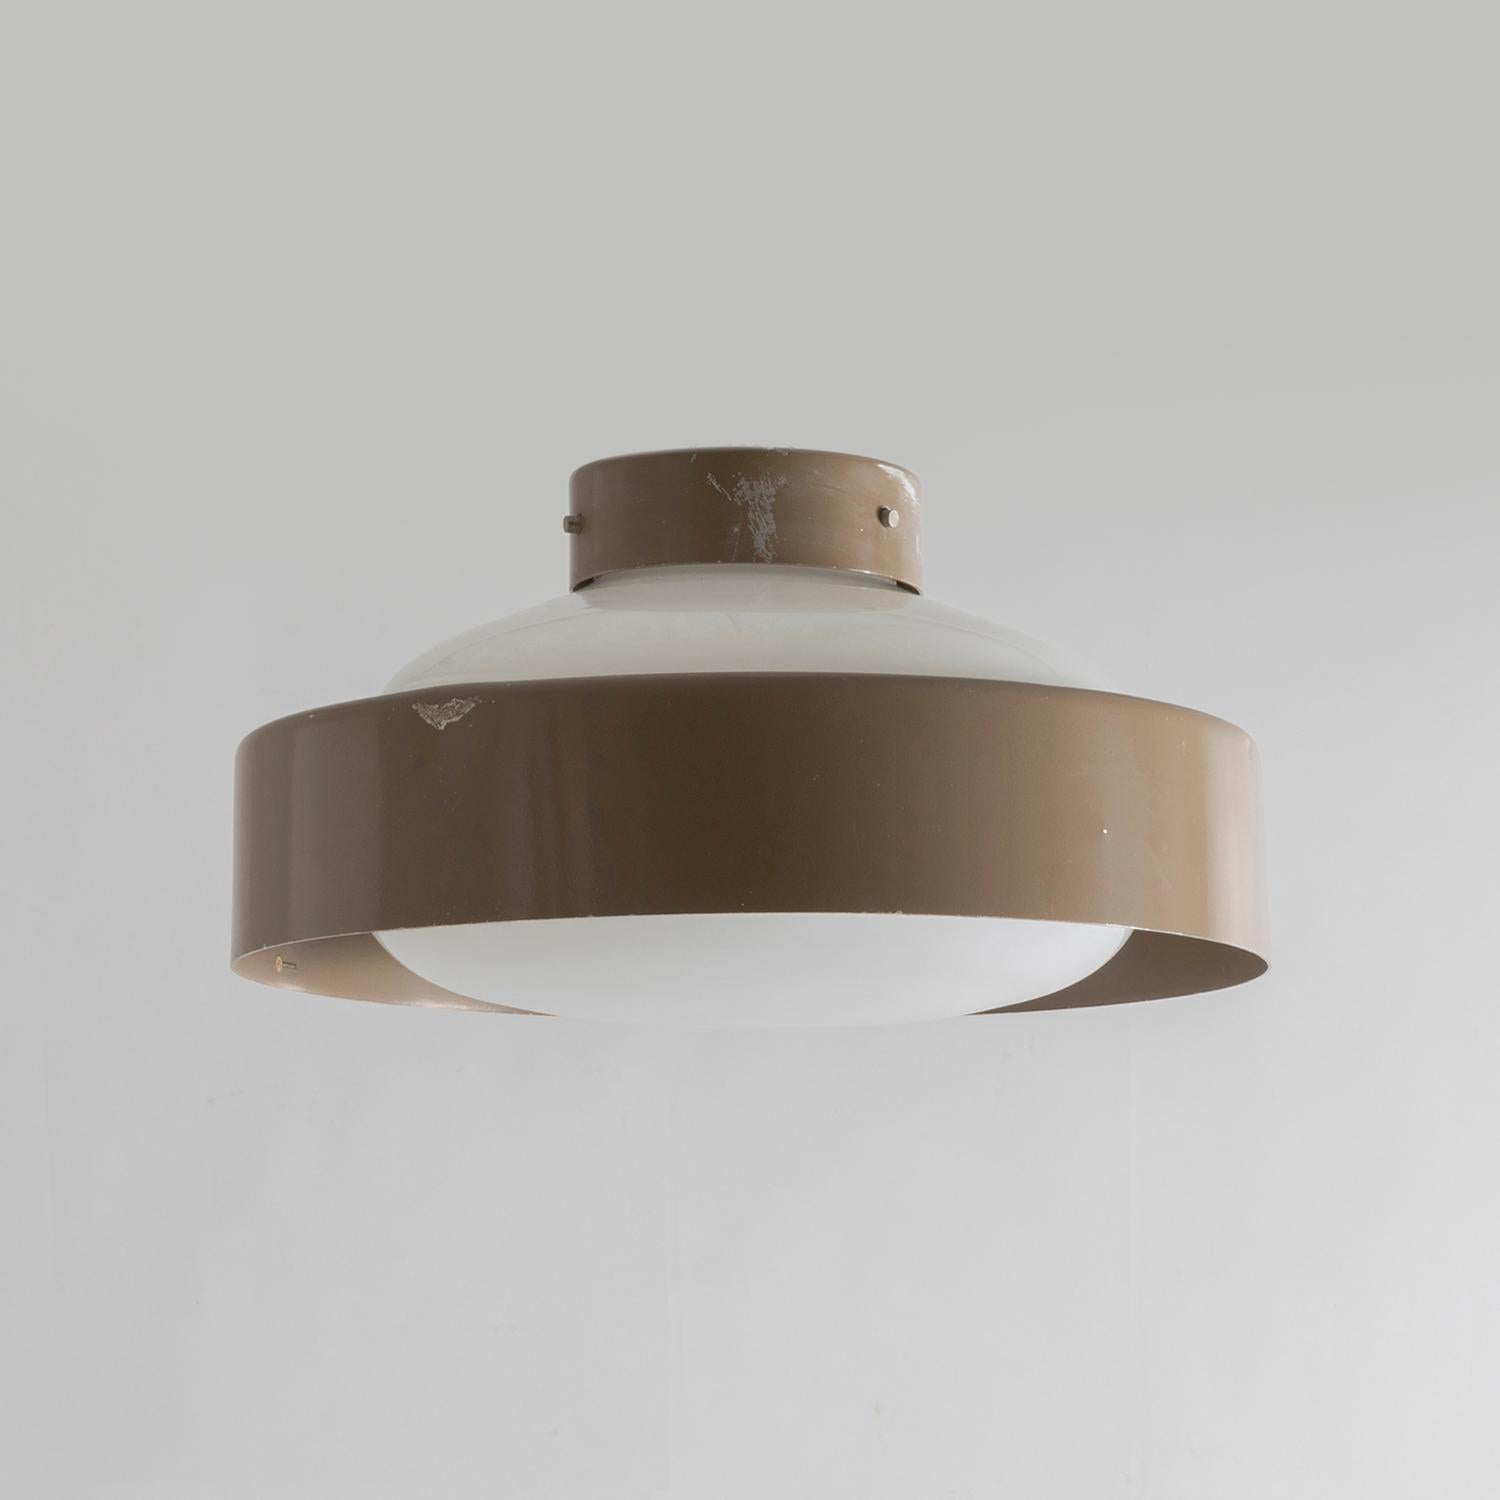 Ceiling lamp mod 3053 by Gino Sarfatti for Arteluce 2